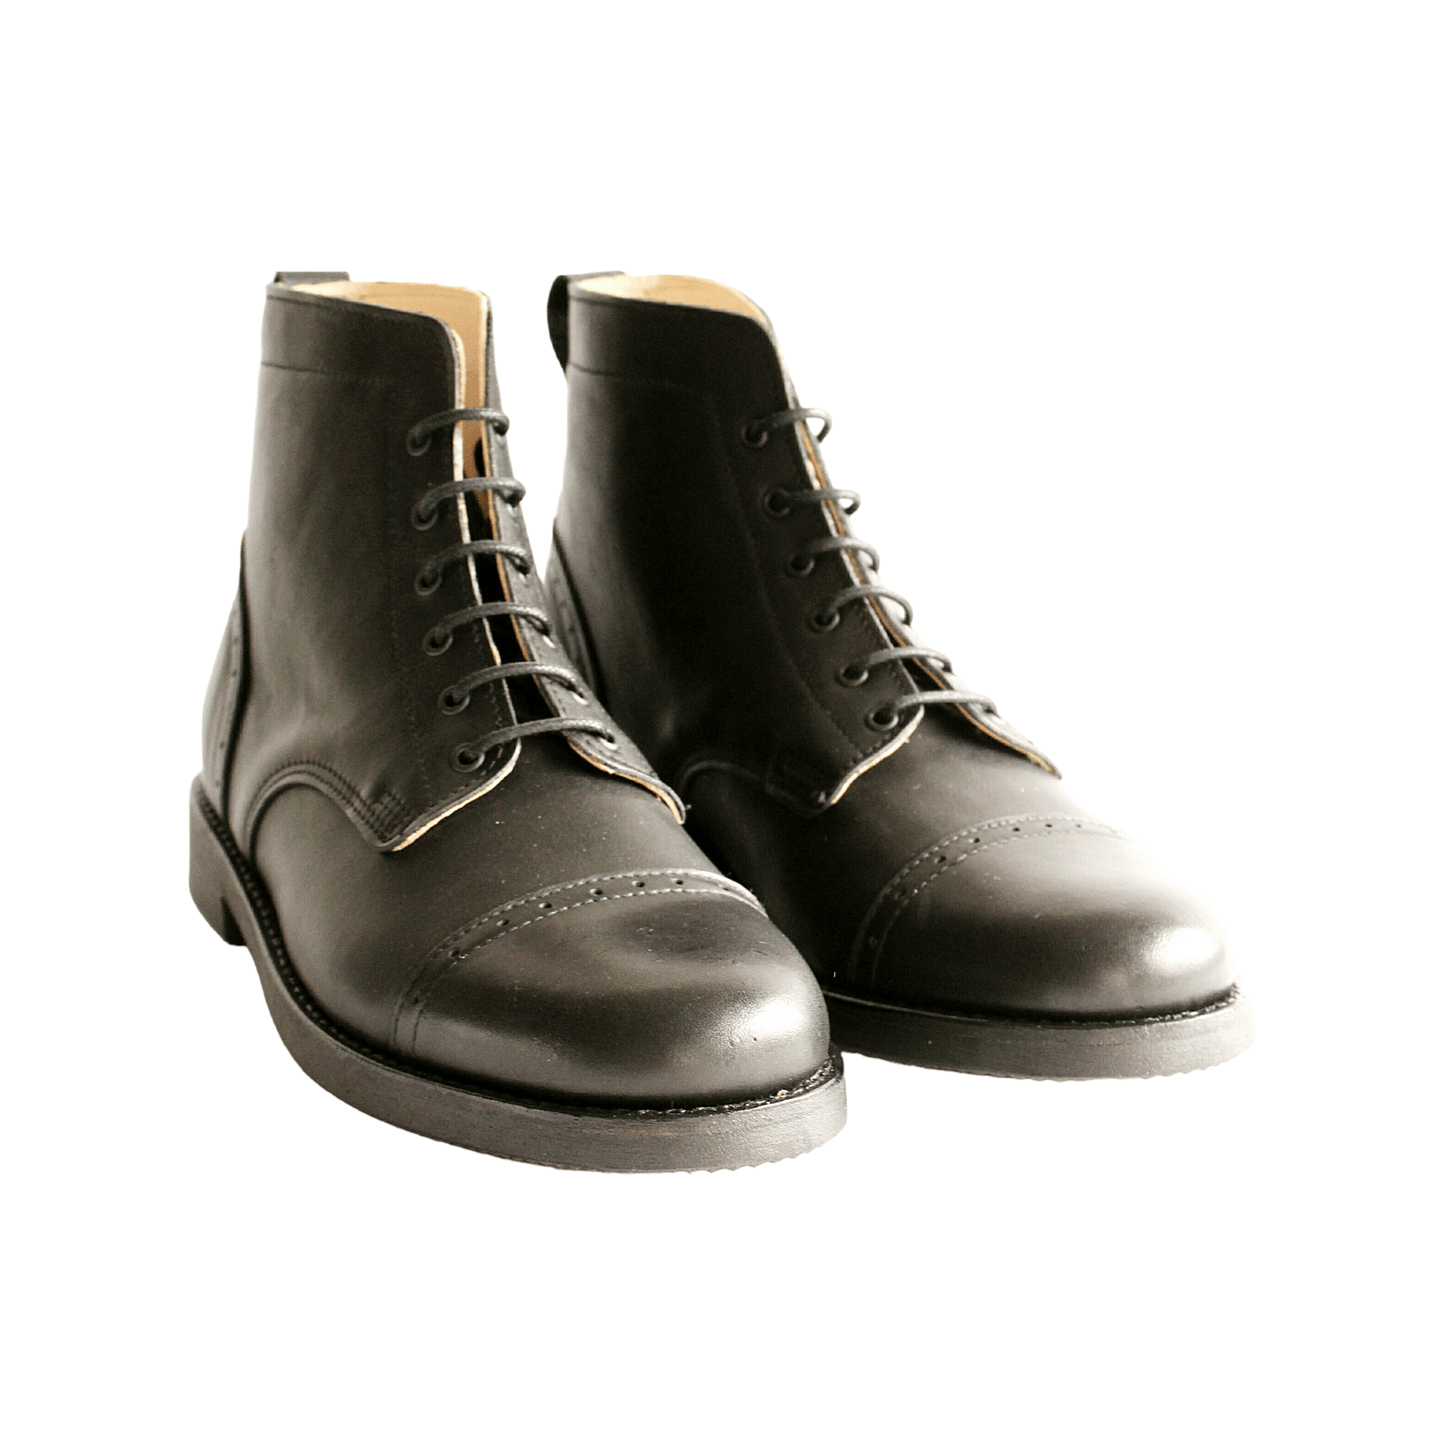 Tejo Black Boots - OldMulla - Boots Store, Handmade By George Family